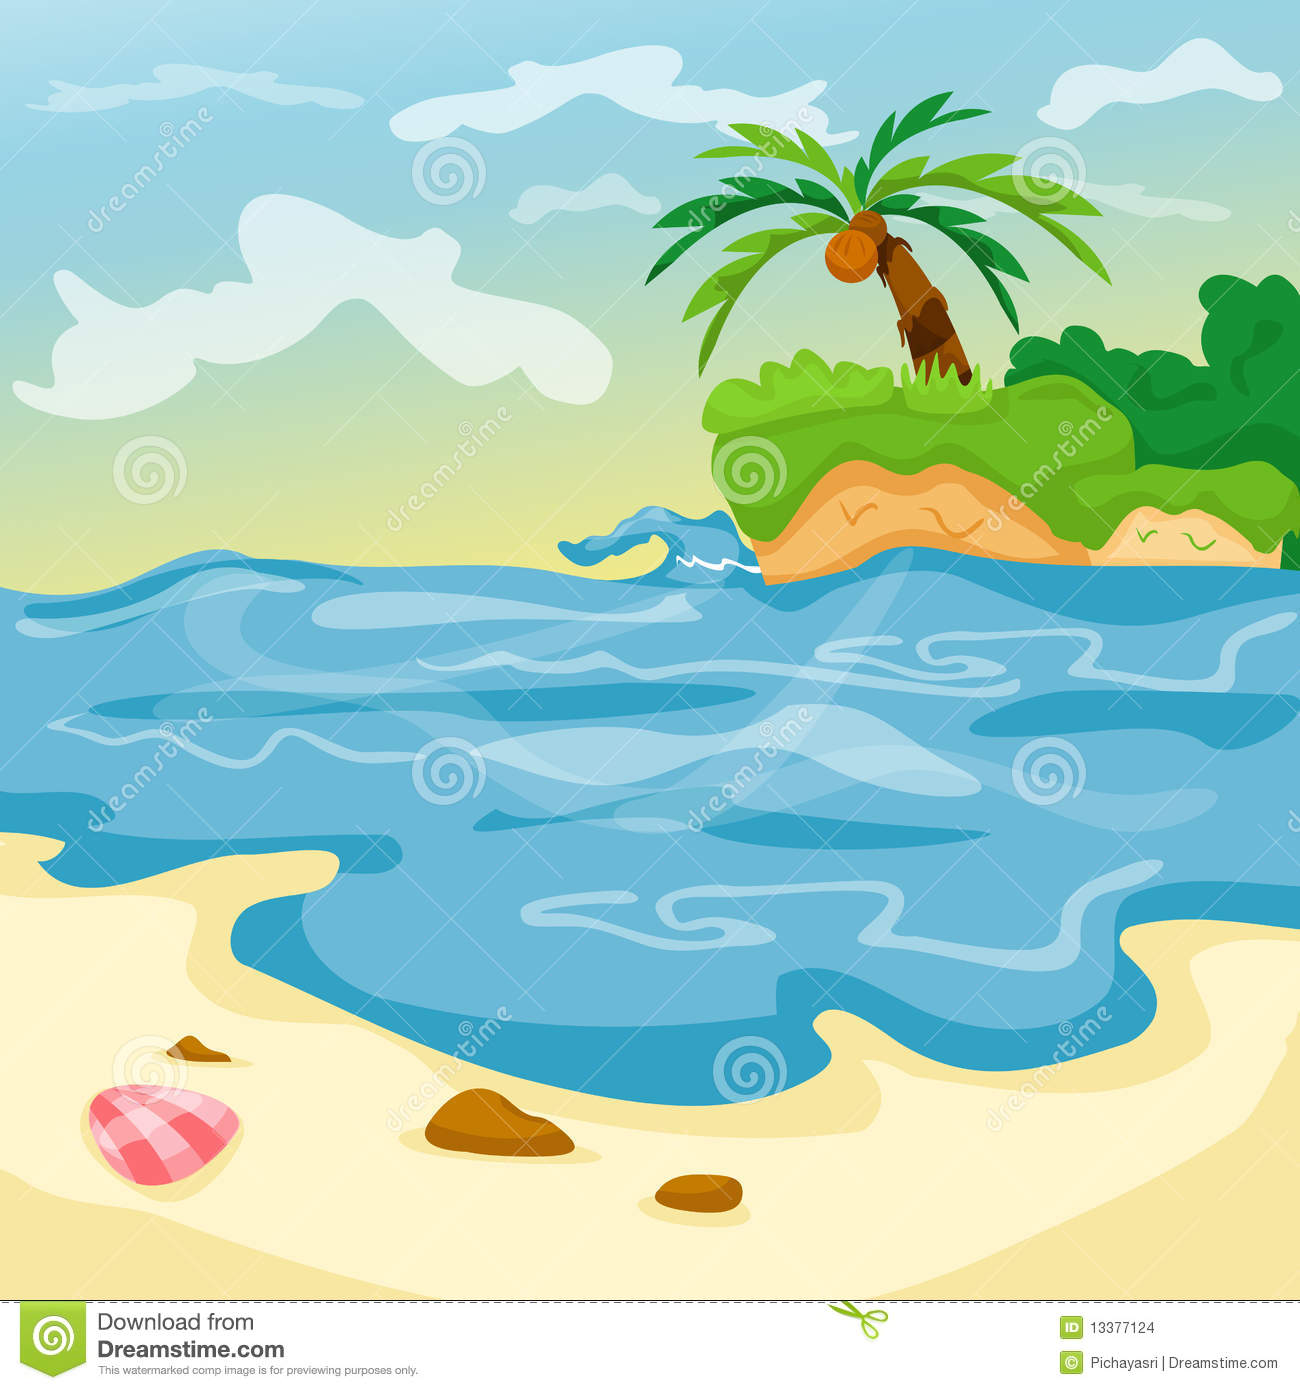 Seascape clipart #16, Download drawings